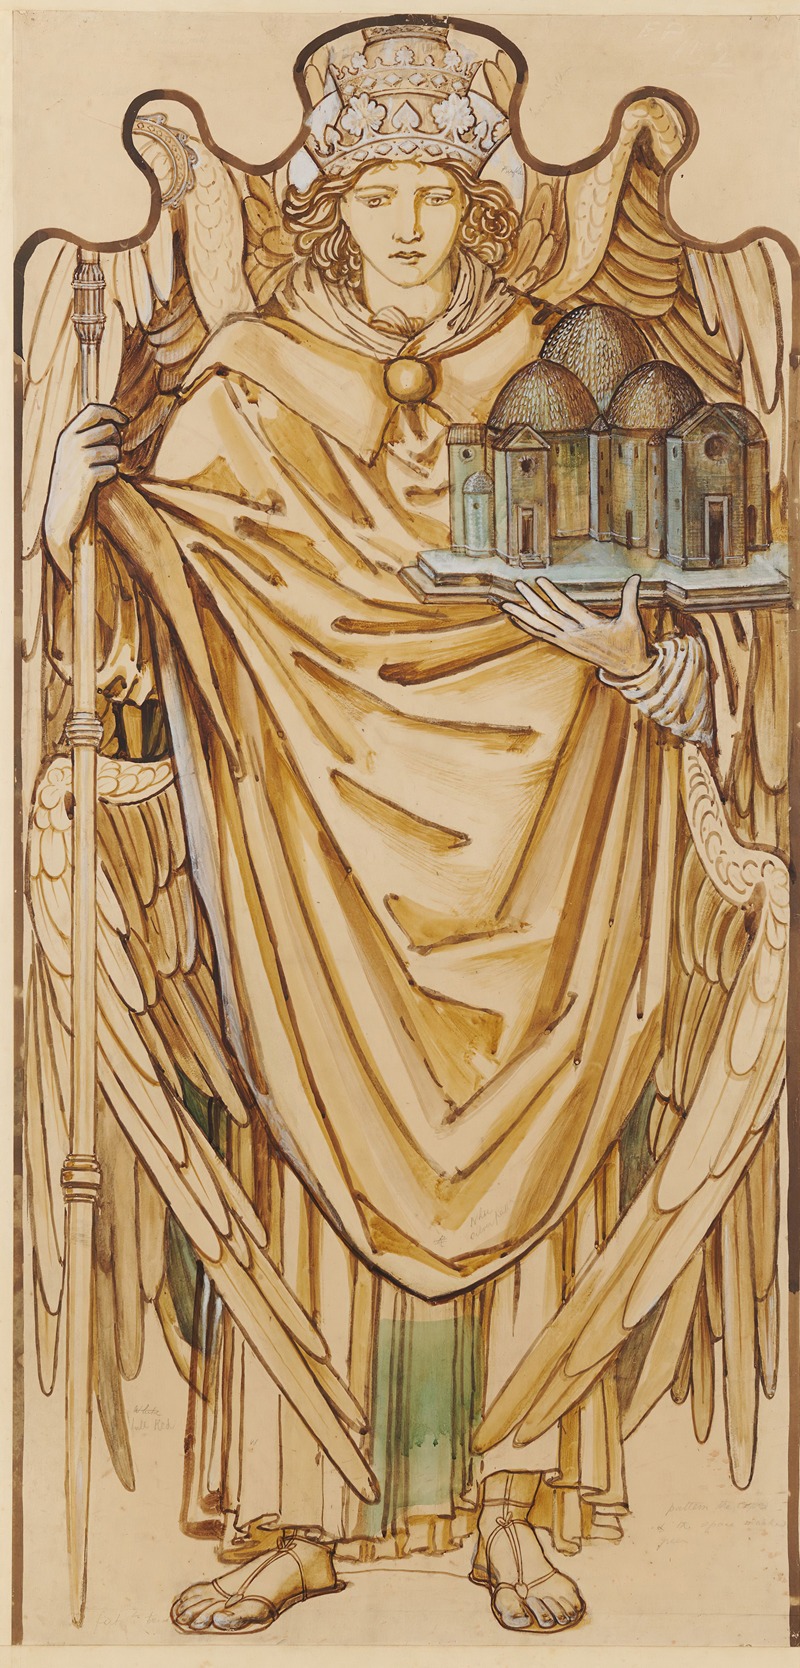 Sir Edward Coley Burne-Jones - The Angels of the Hierarchy – Potentates